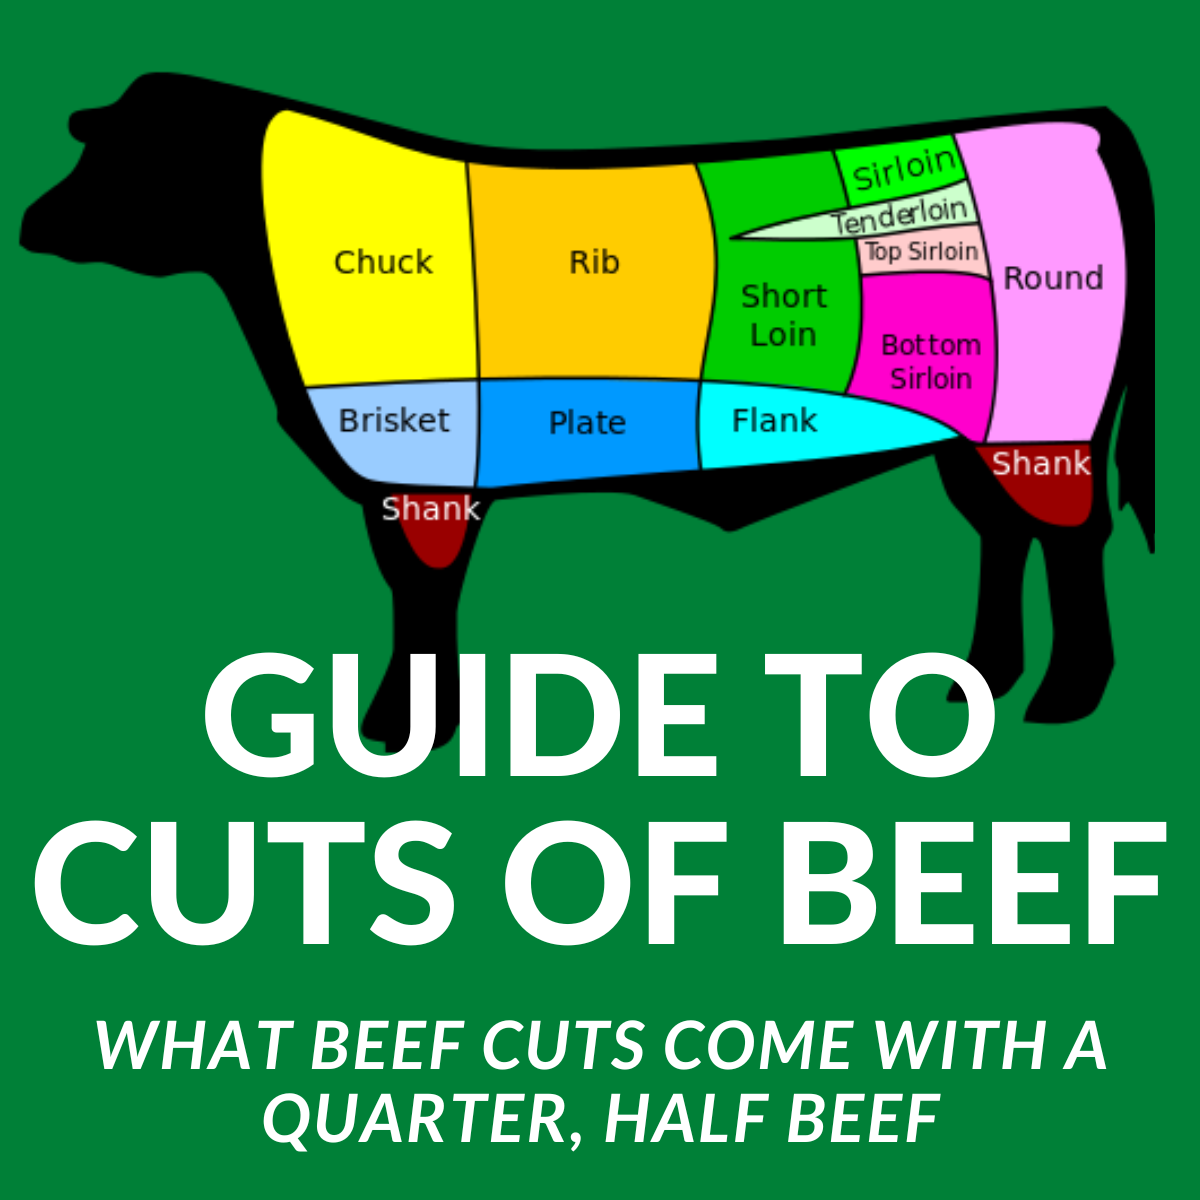 https://www.clovermeadowsbeef.com/wp-content/uploads/2022/09/cuts-of-beef-what-comes-with-quarter-beef-half-beef-side-beef-half-a-cow.png